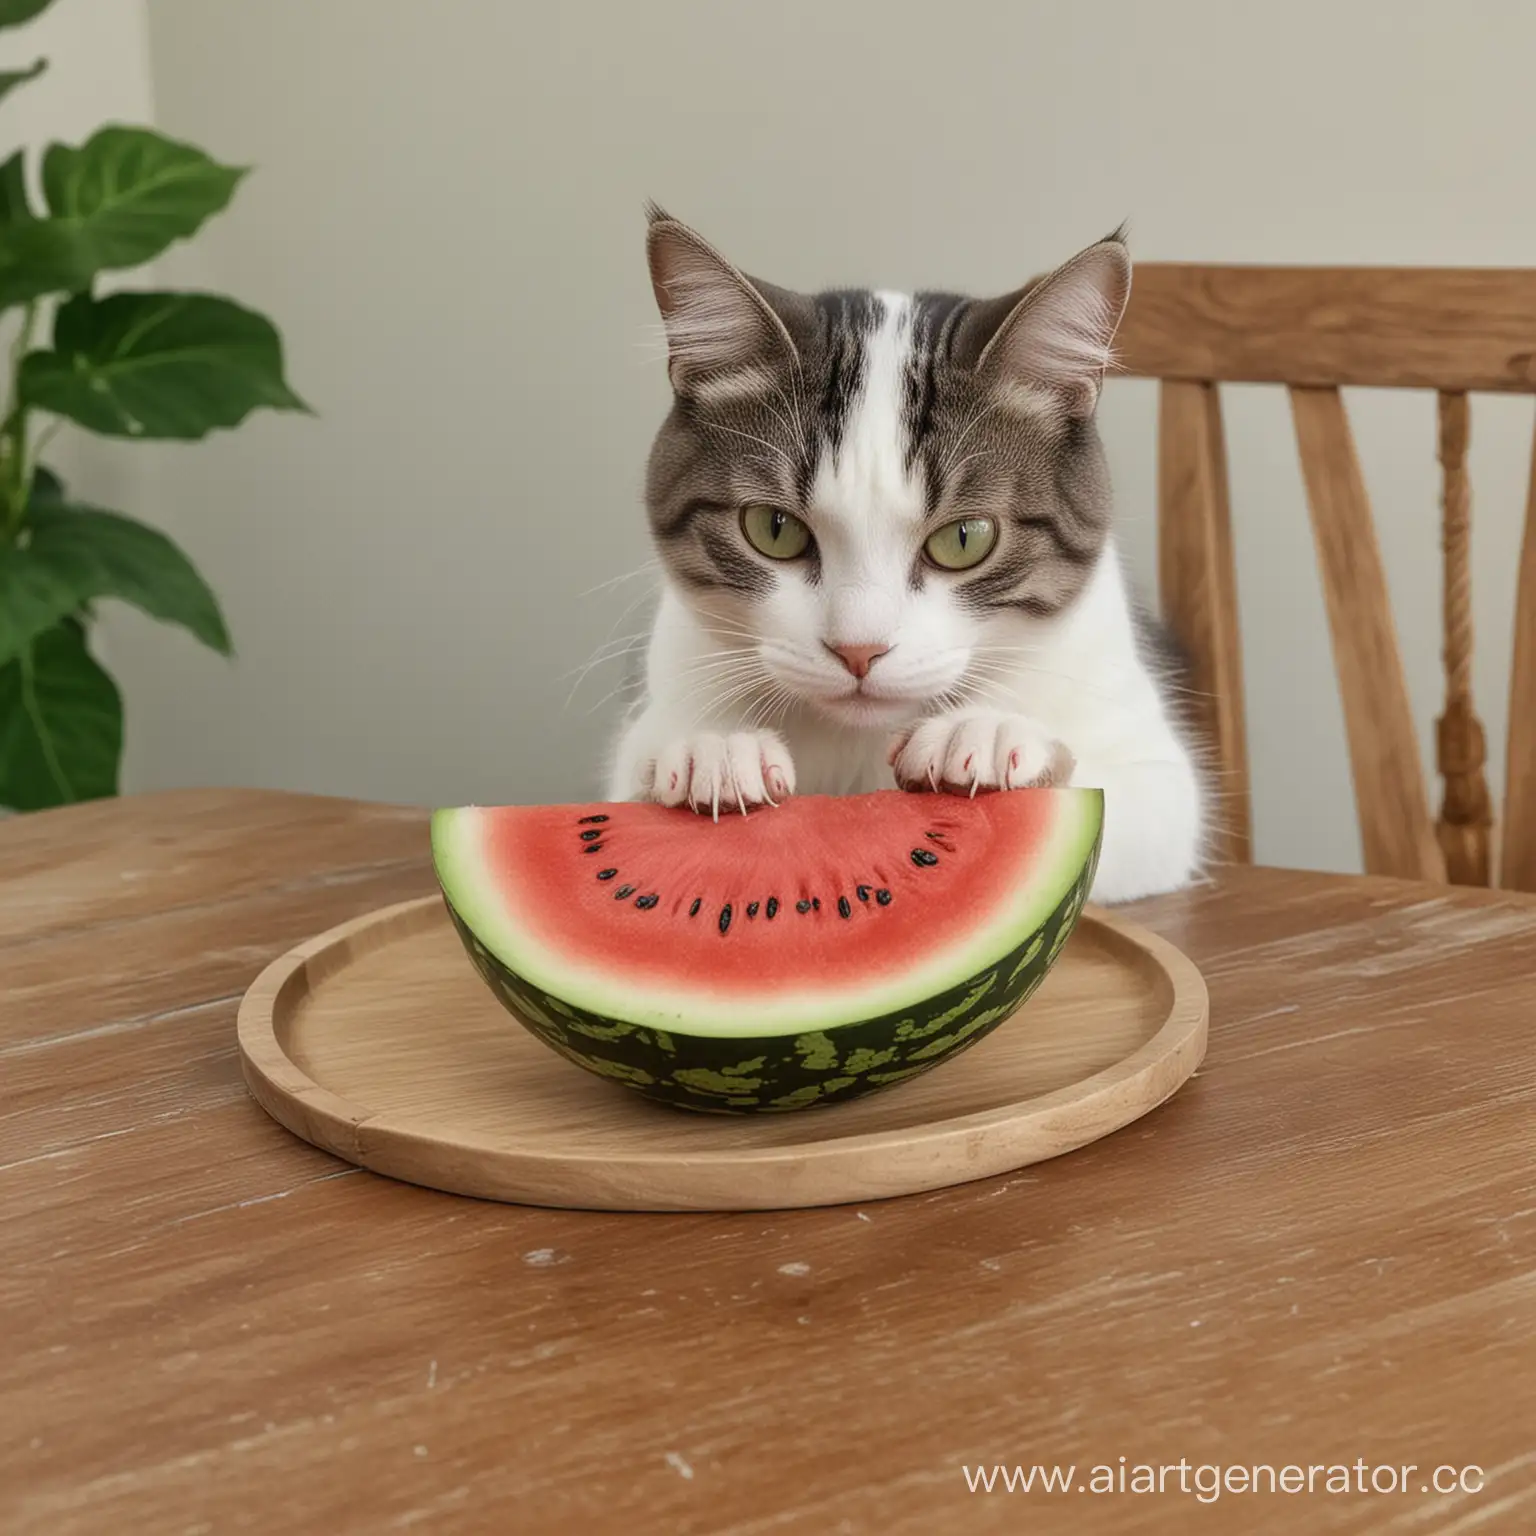 Cat-Eating-Watermelon-on-Table